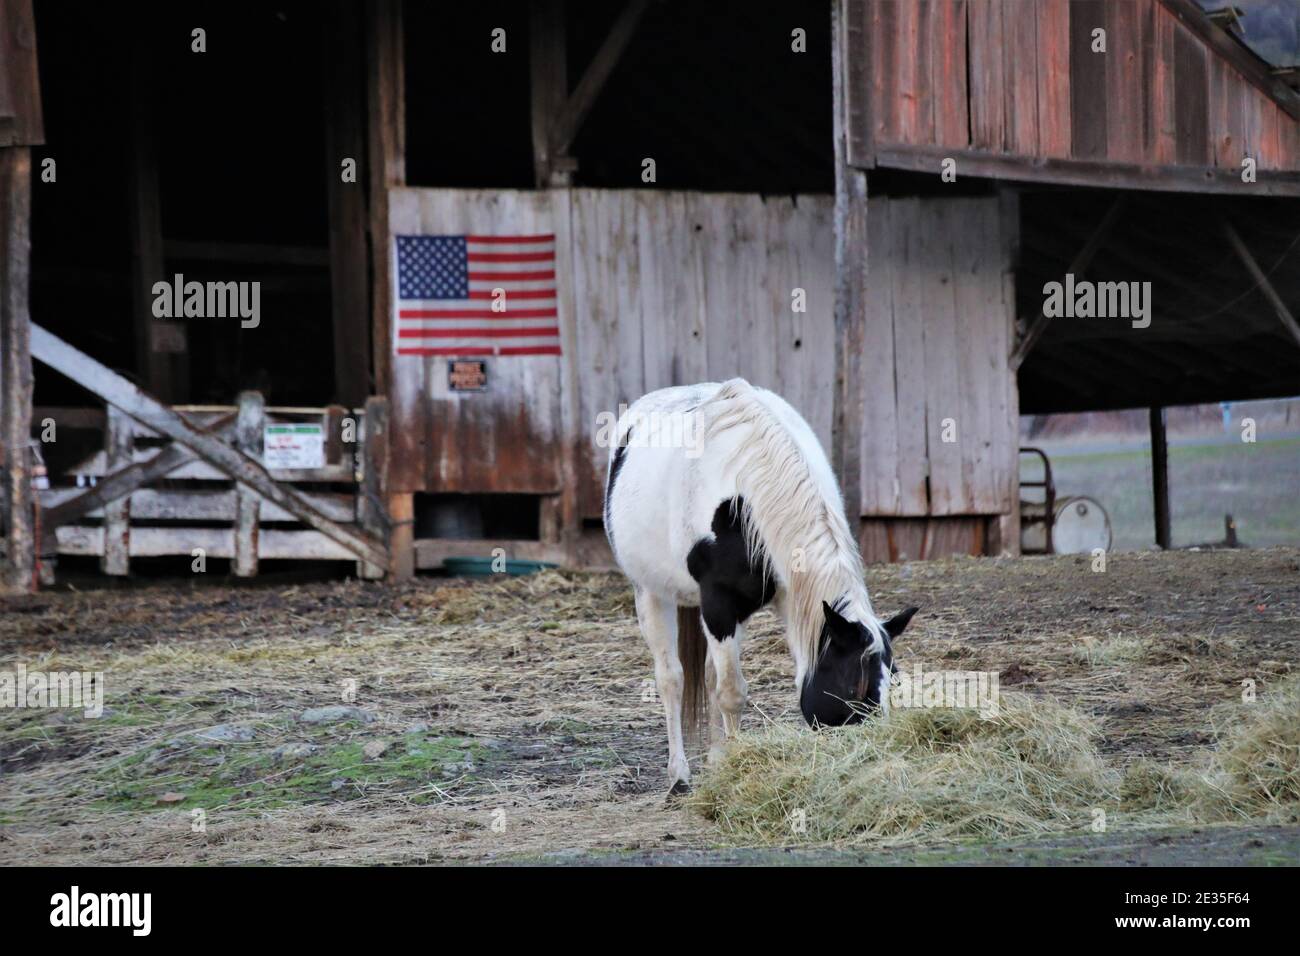 Horses eating in the evening near Lakeport on Clearlake, California with American flag on the old barn in the rear Stock Photo